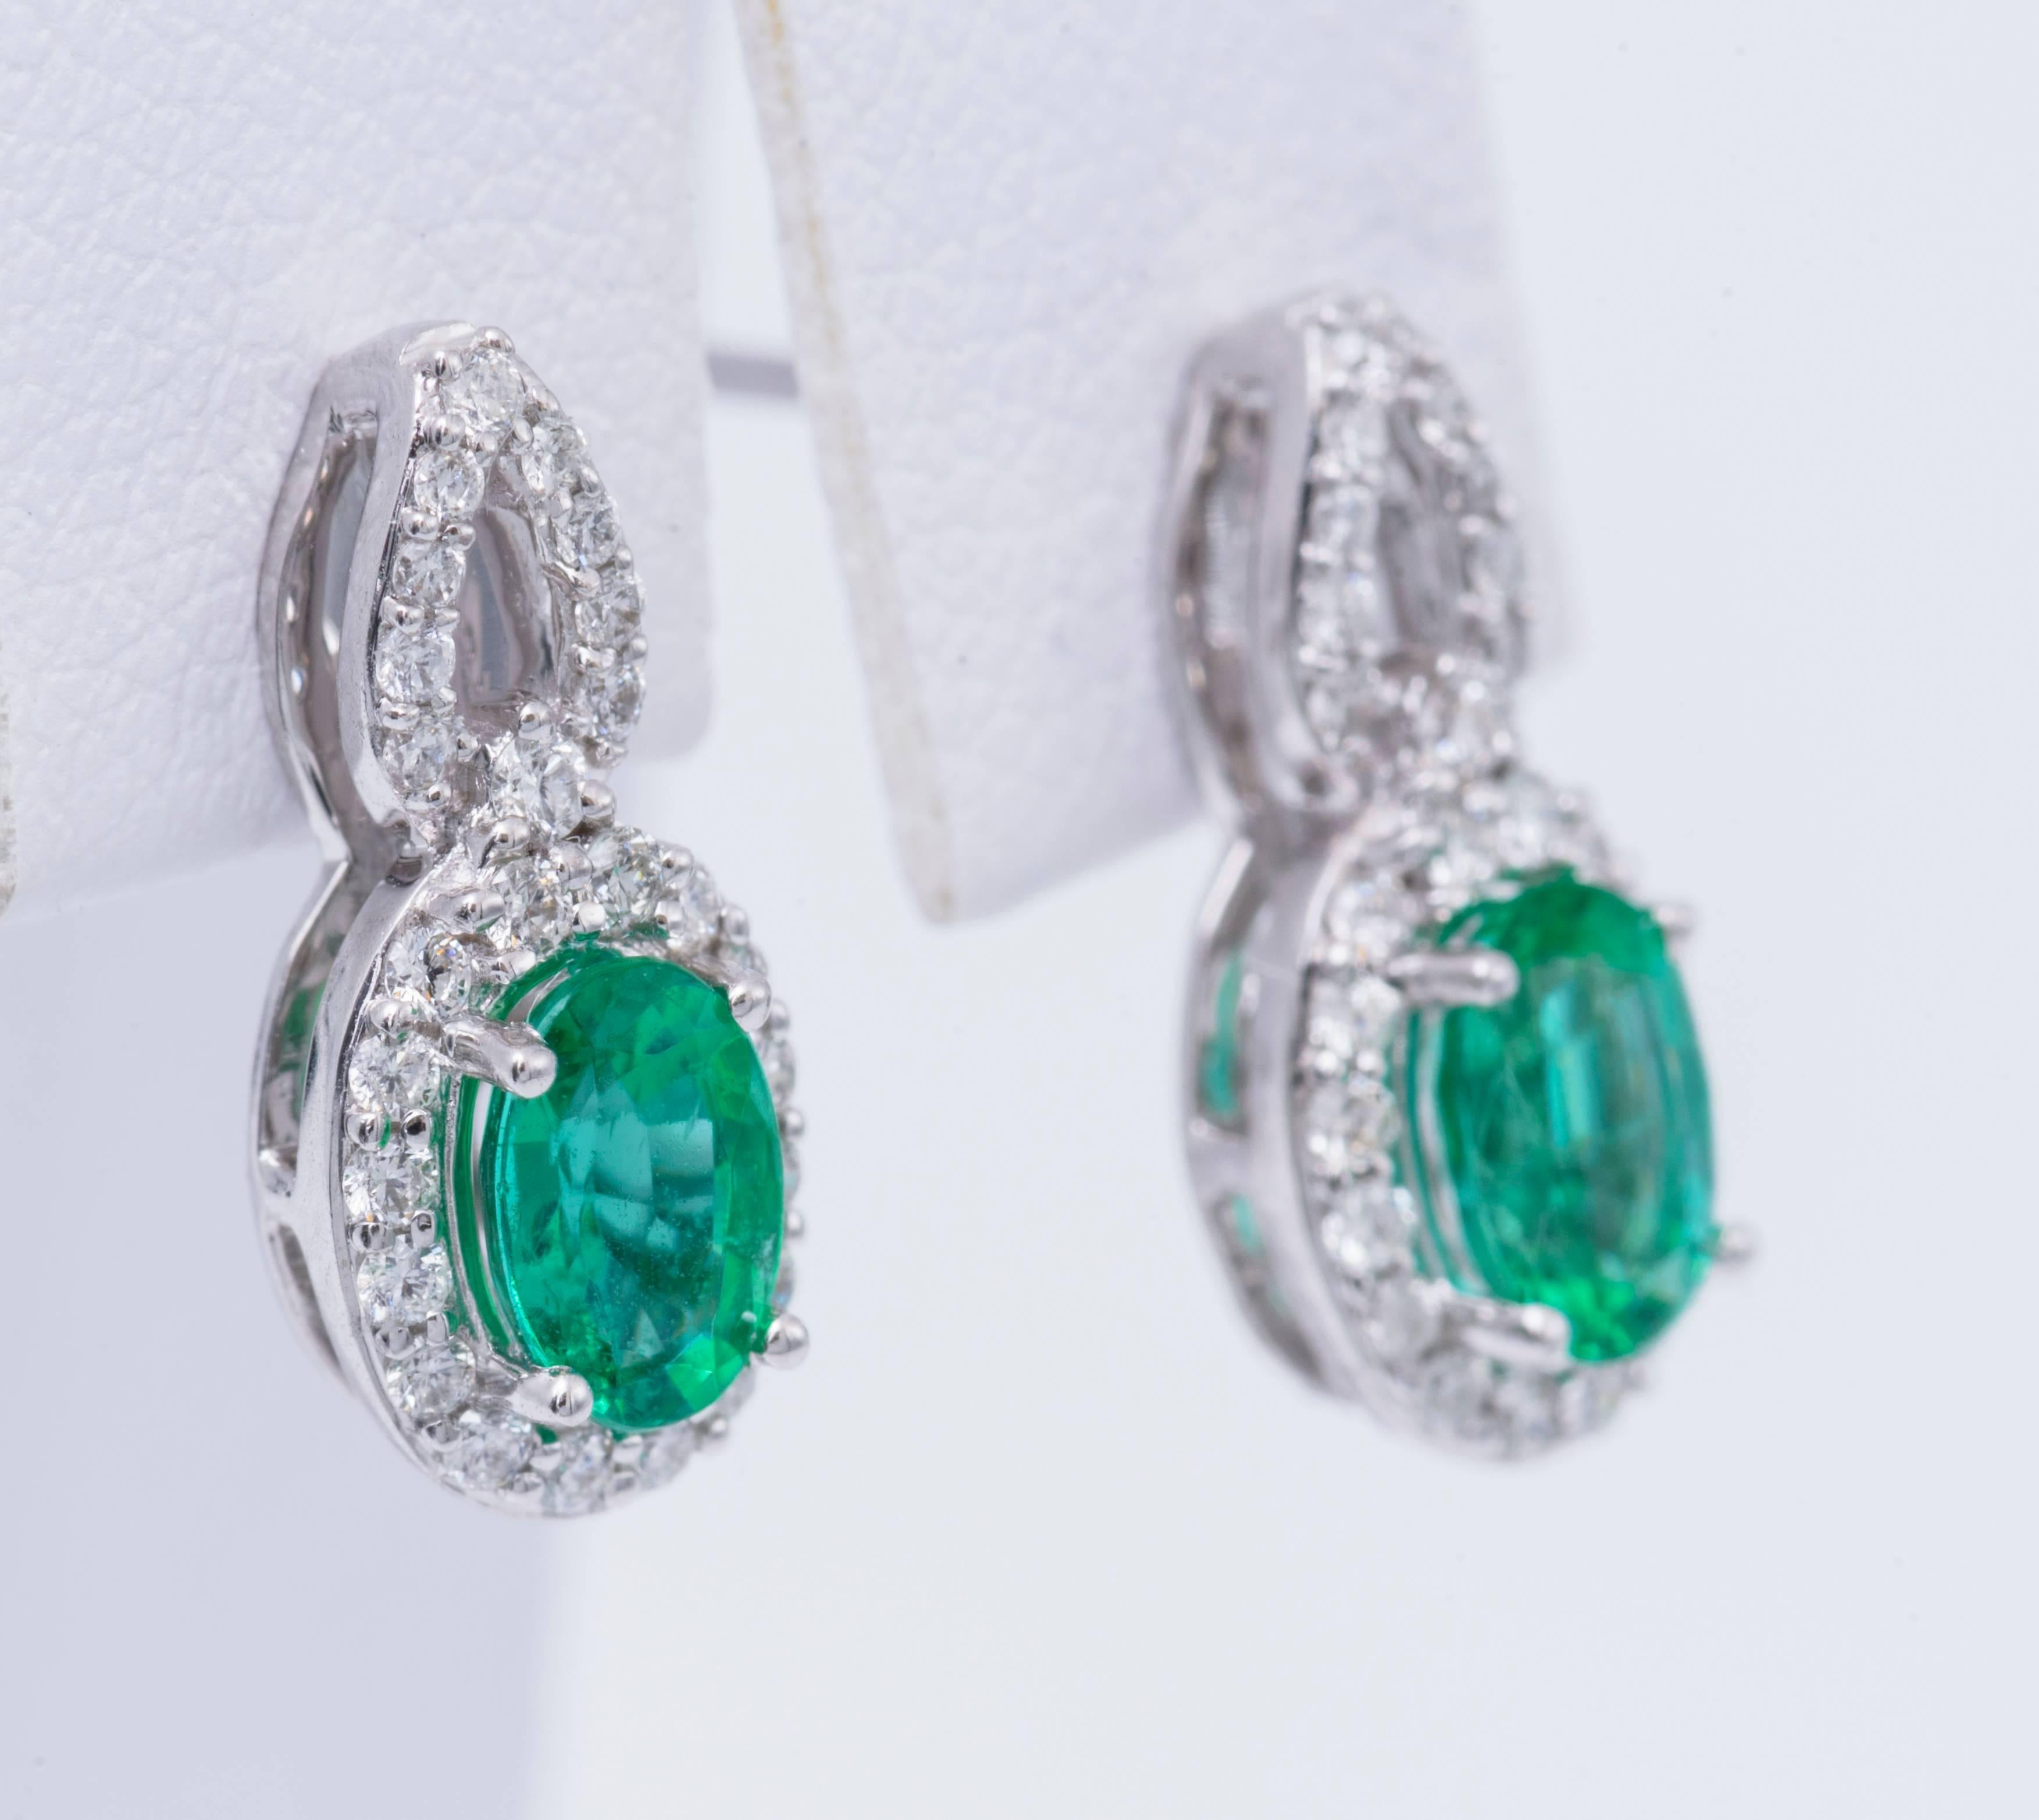 Emerald measuring 6mm  X 4mm each for a total weight of 0.82 Cts.
14K  gold
The earrings measure 1.5 cm x 6 mm